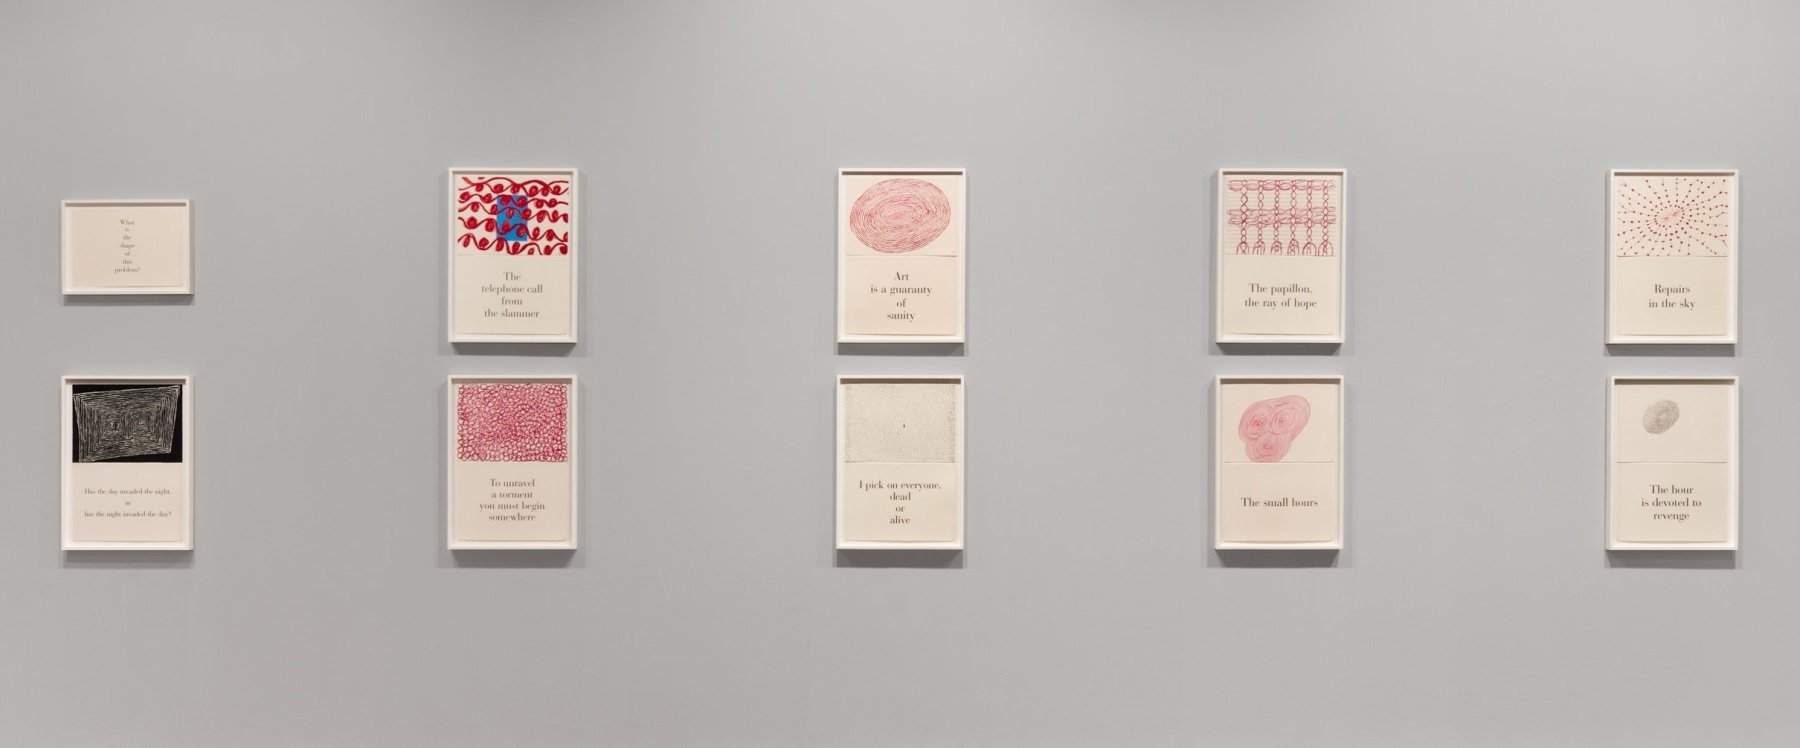 An image of the Louise Bourgeois suite of 9 diptychs with 1 title page, each in a white frame mounted on a grey wall